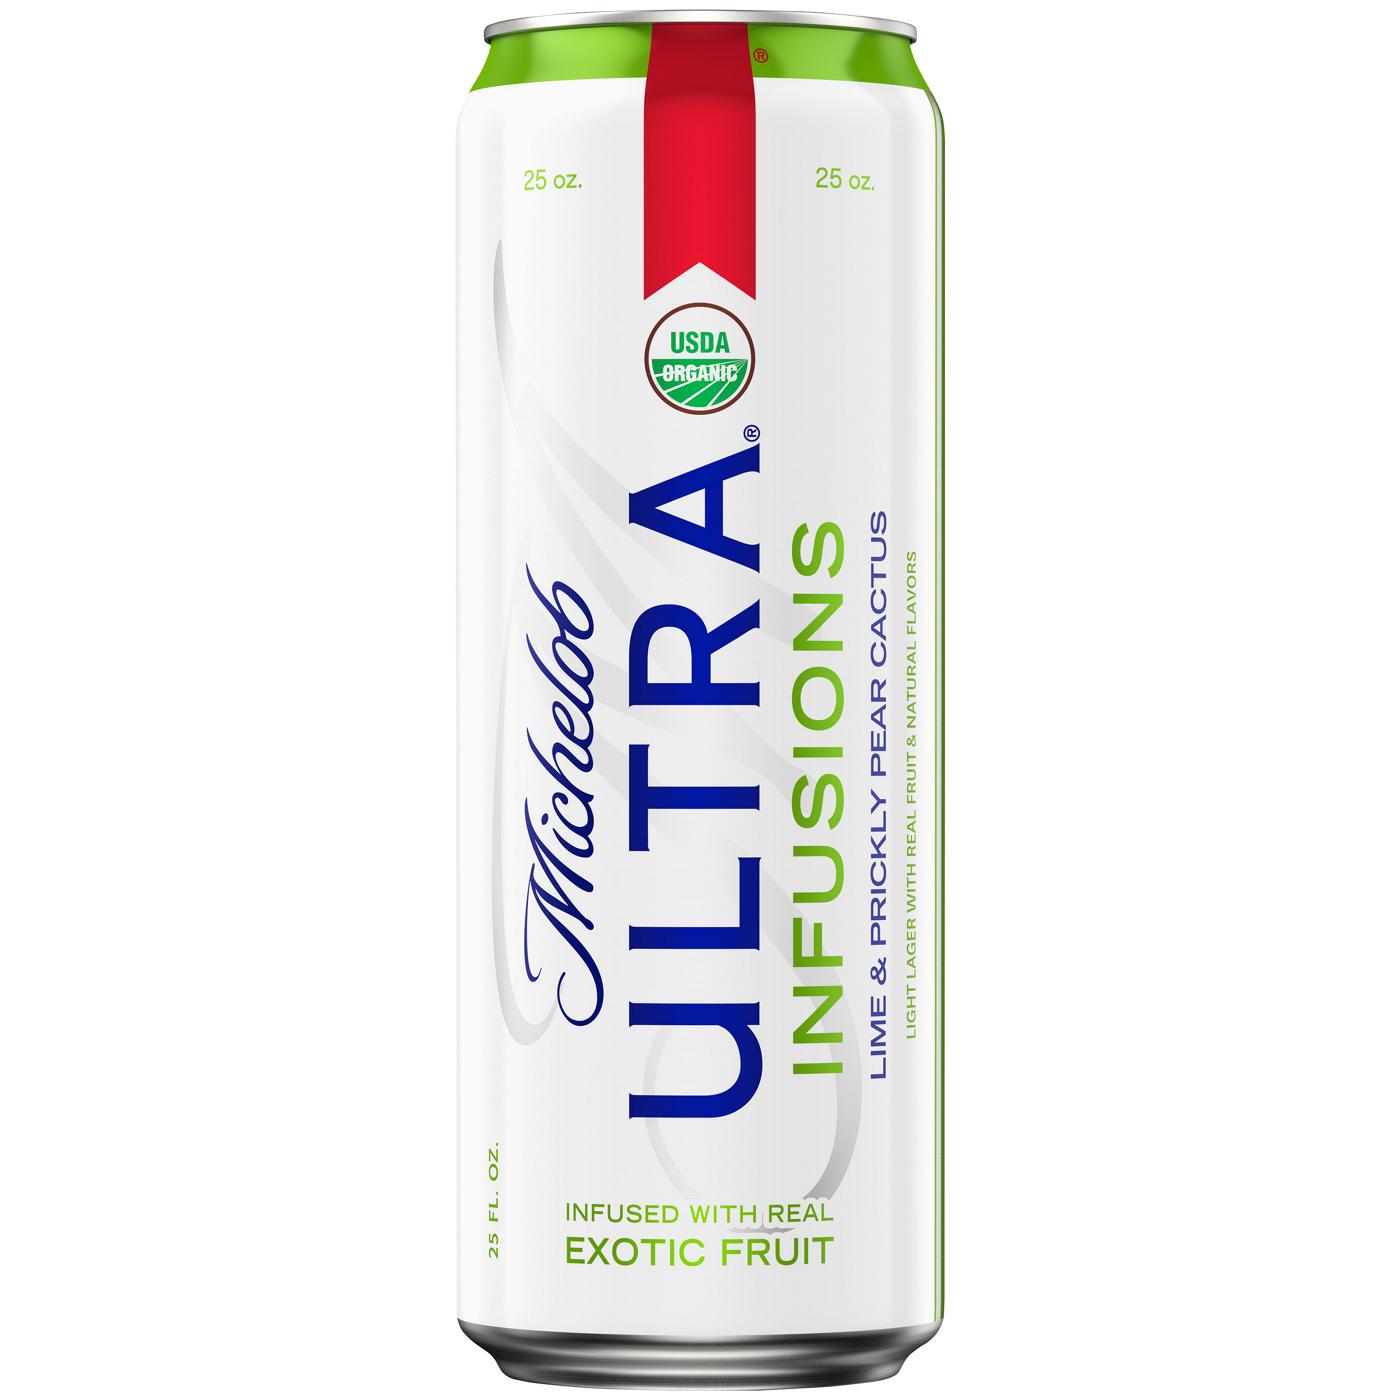 Michelob Ultra Infusions Lime & Prickly Pear Cactus Light Lager Beer; image 2 of 2